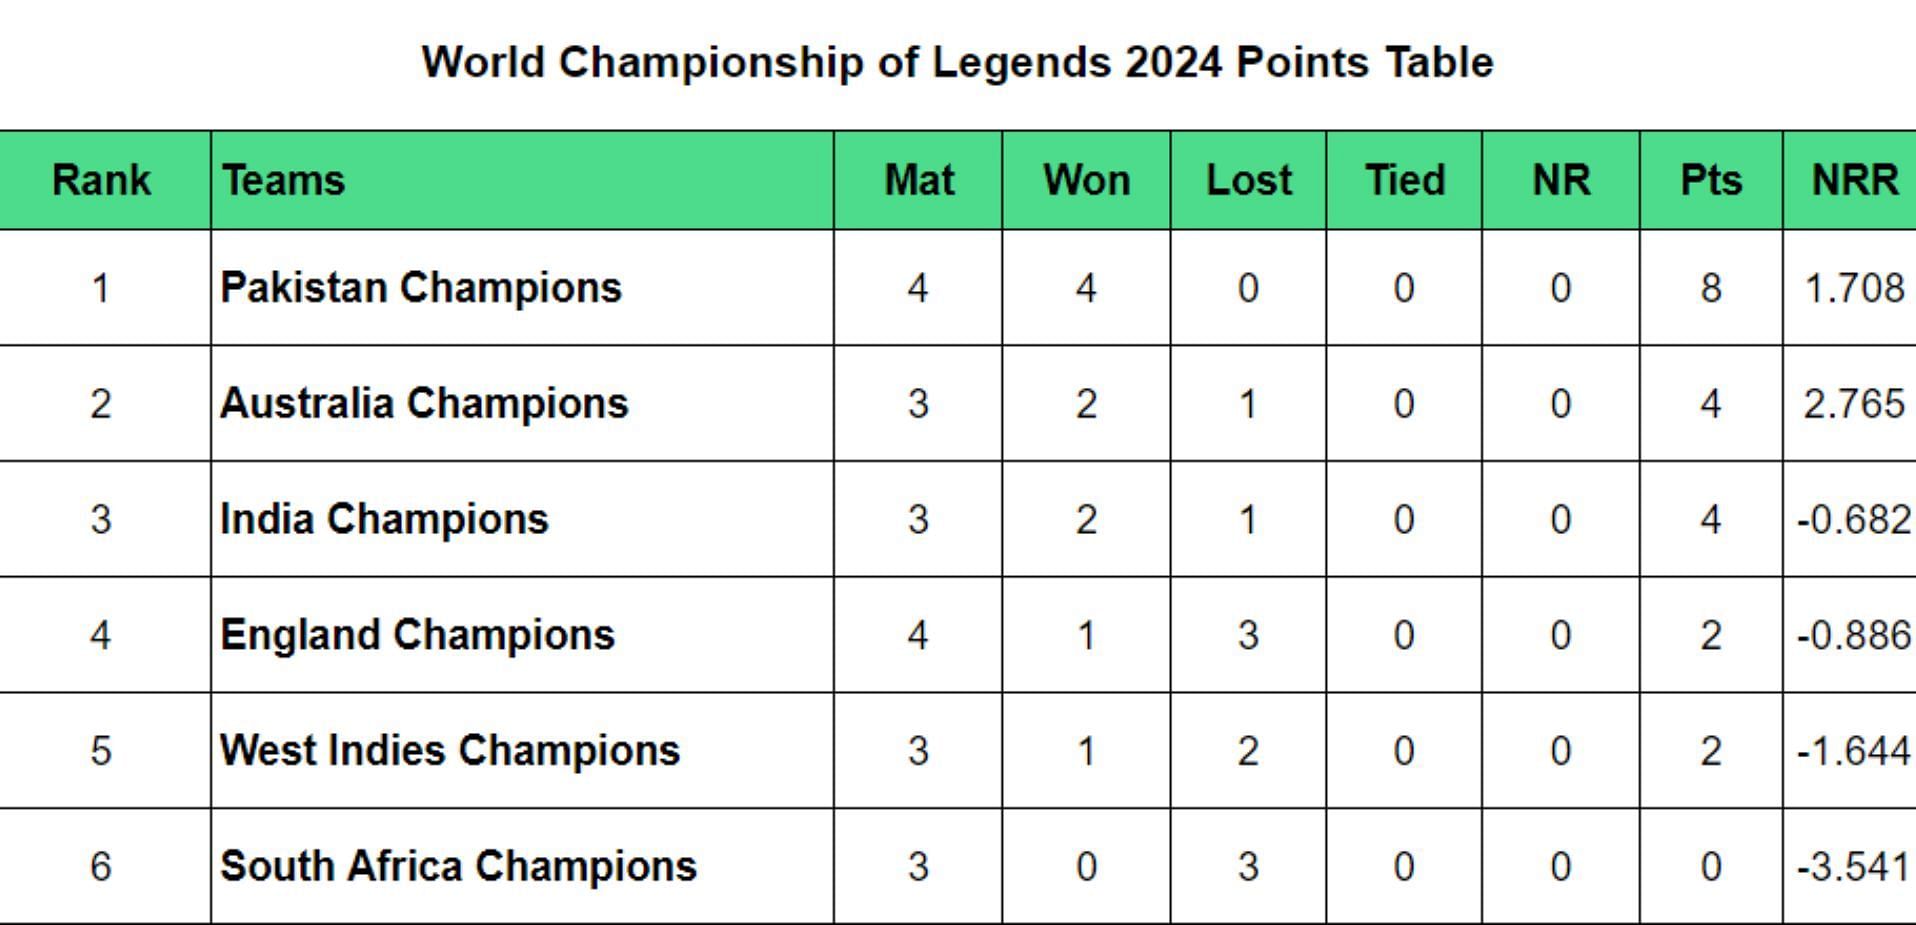 World Championship of Legends 2024 Points Table: Updated Standings after England vs Pakistan, Match 10